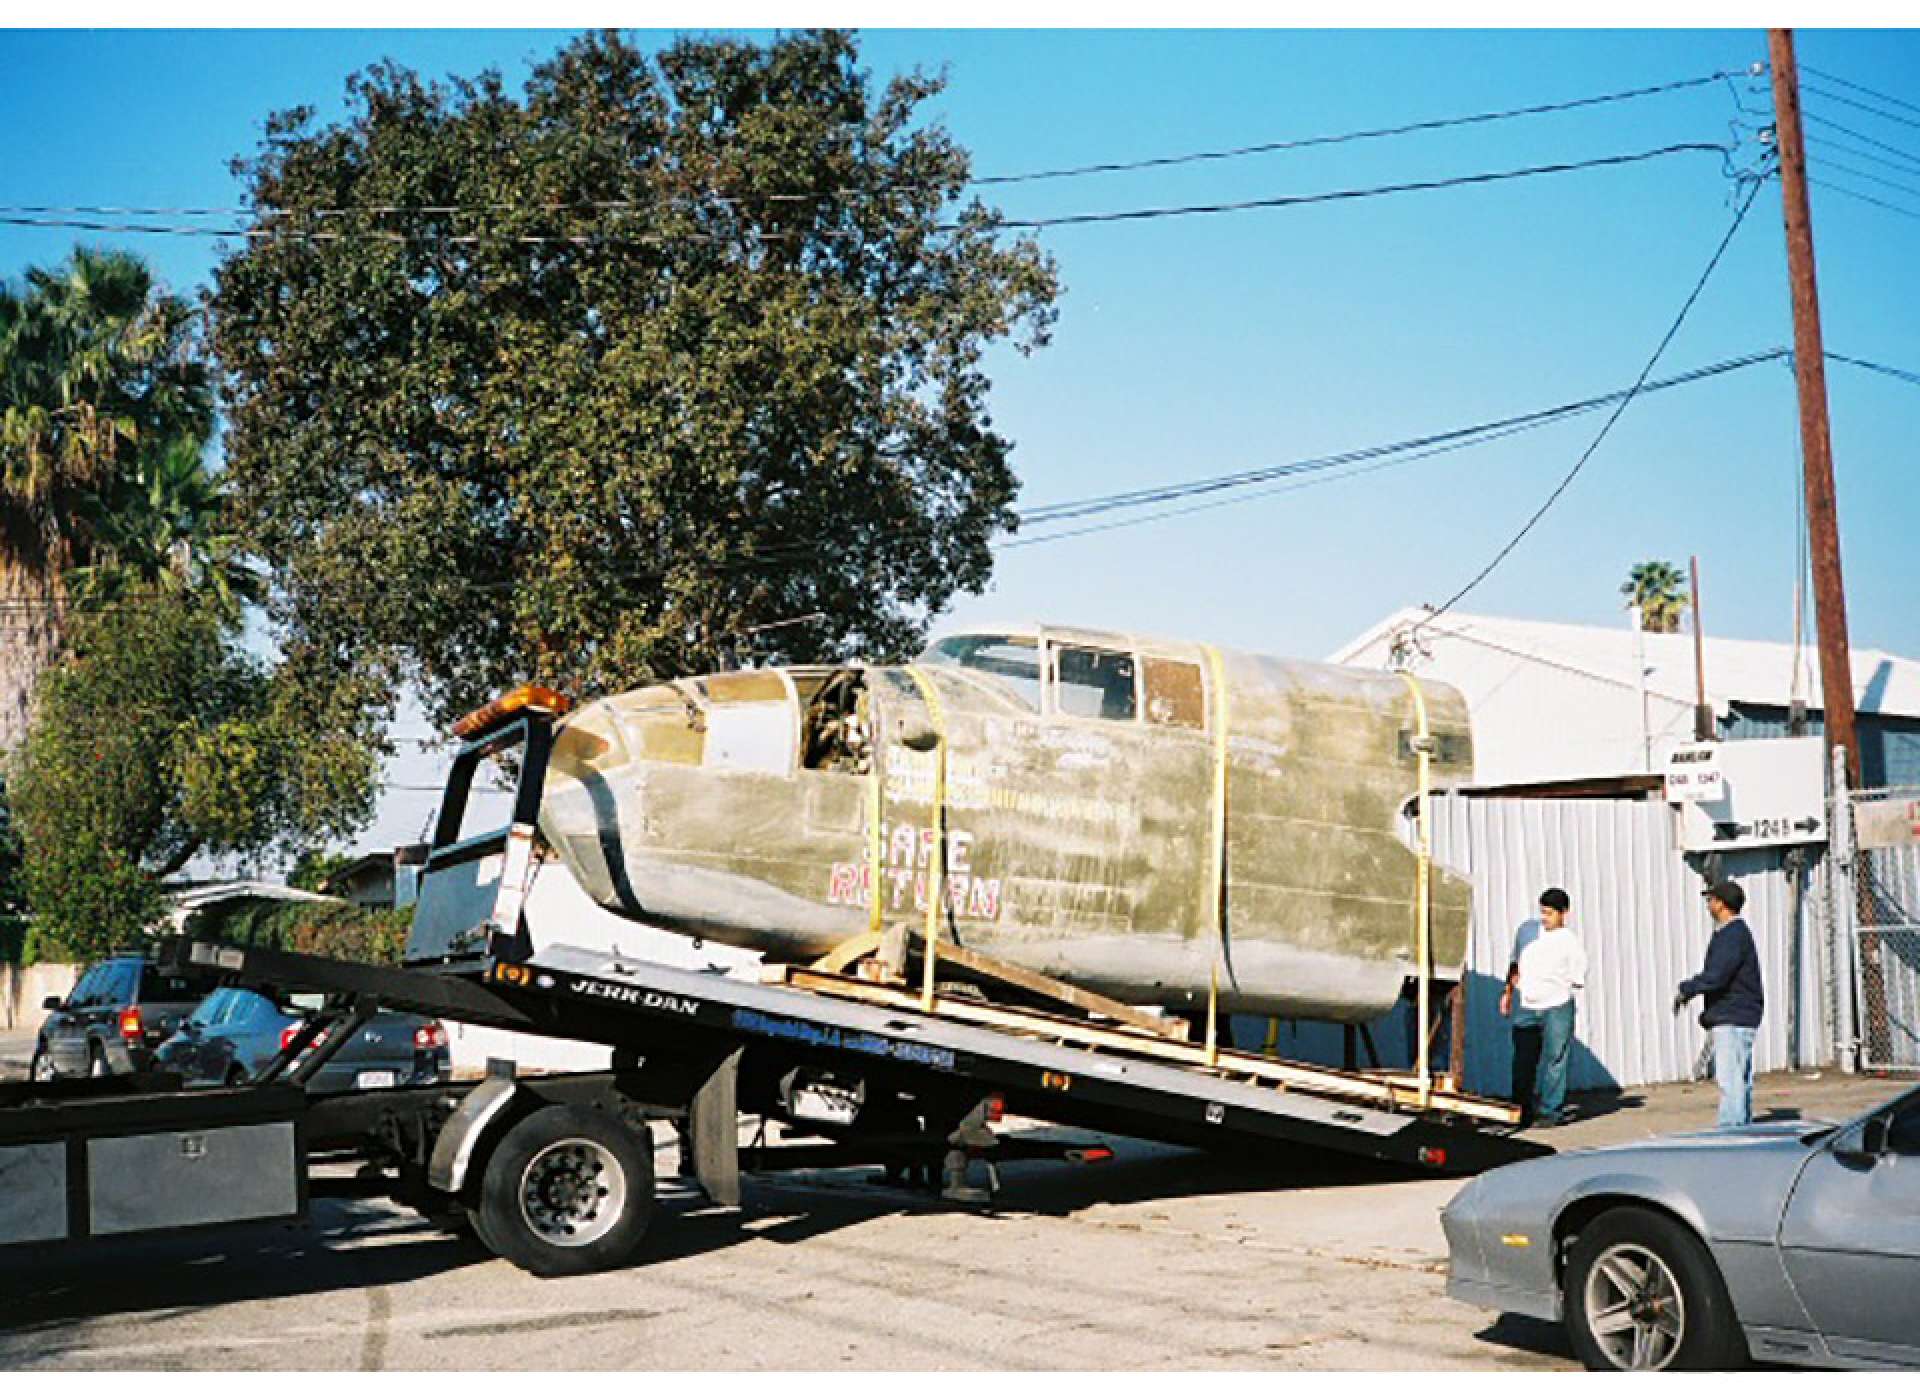 B-25 moves to the restoration facility.